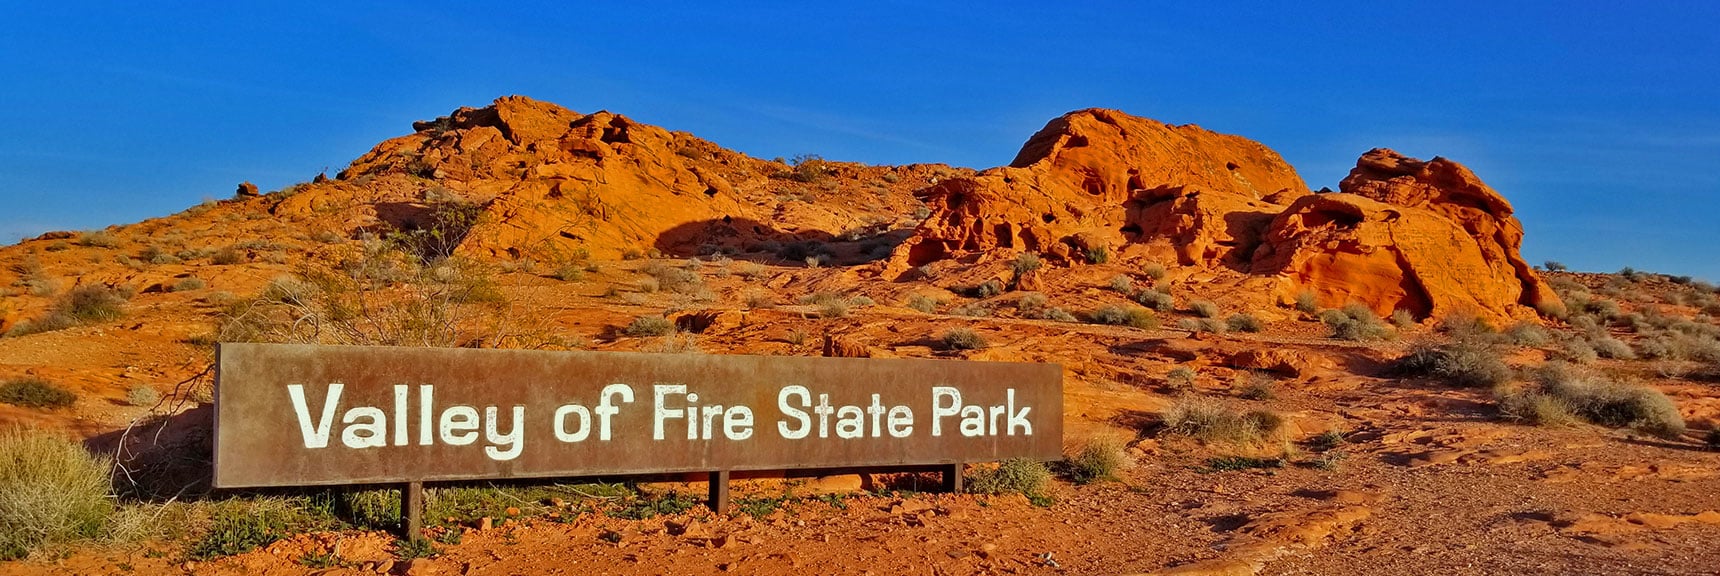 Eastern Entrance Sign | Valley of Fire State Park, Nevada